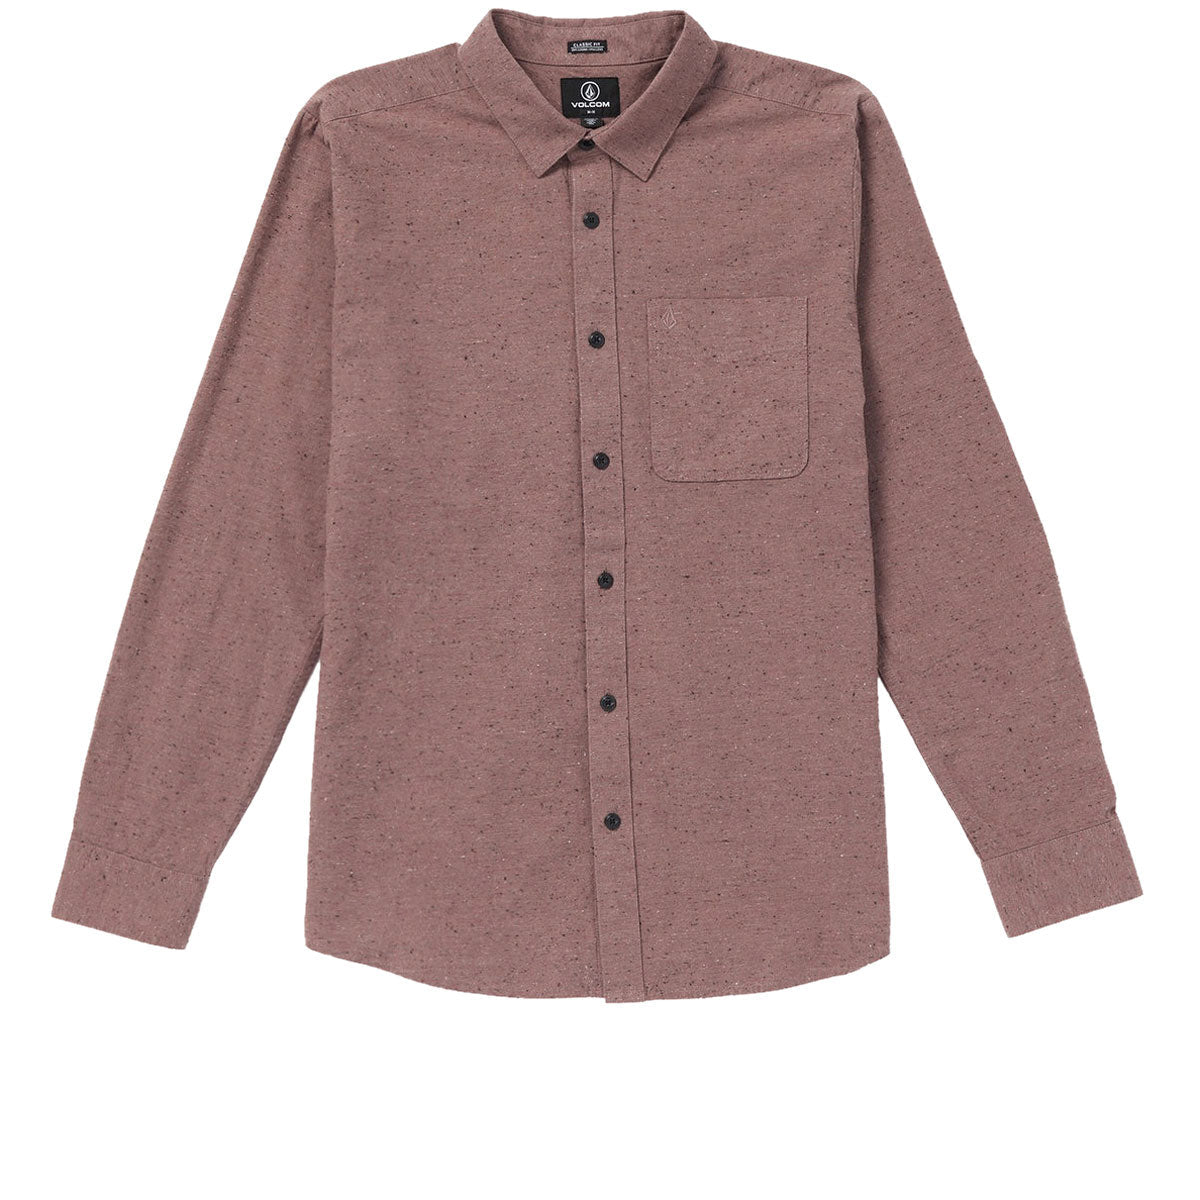 Volcom Date Knight Long Sleeve Shirt - Bordeaux Brown image 1